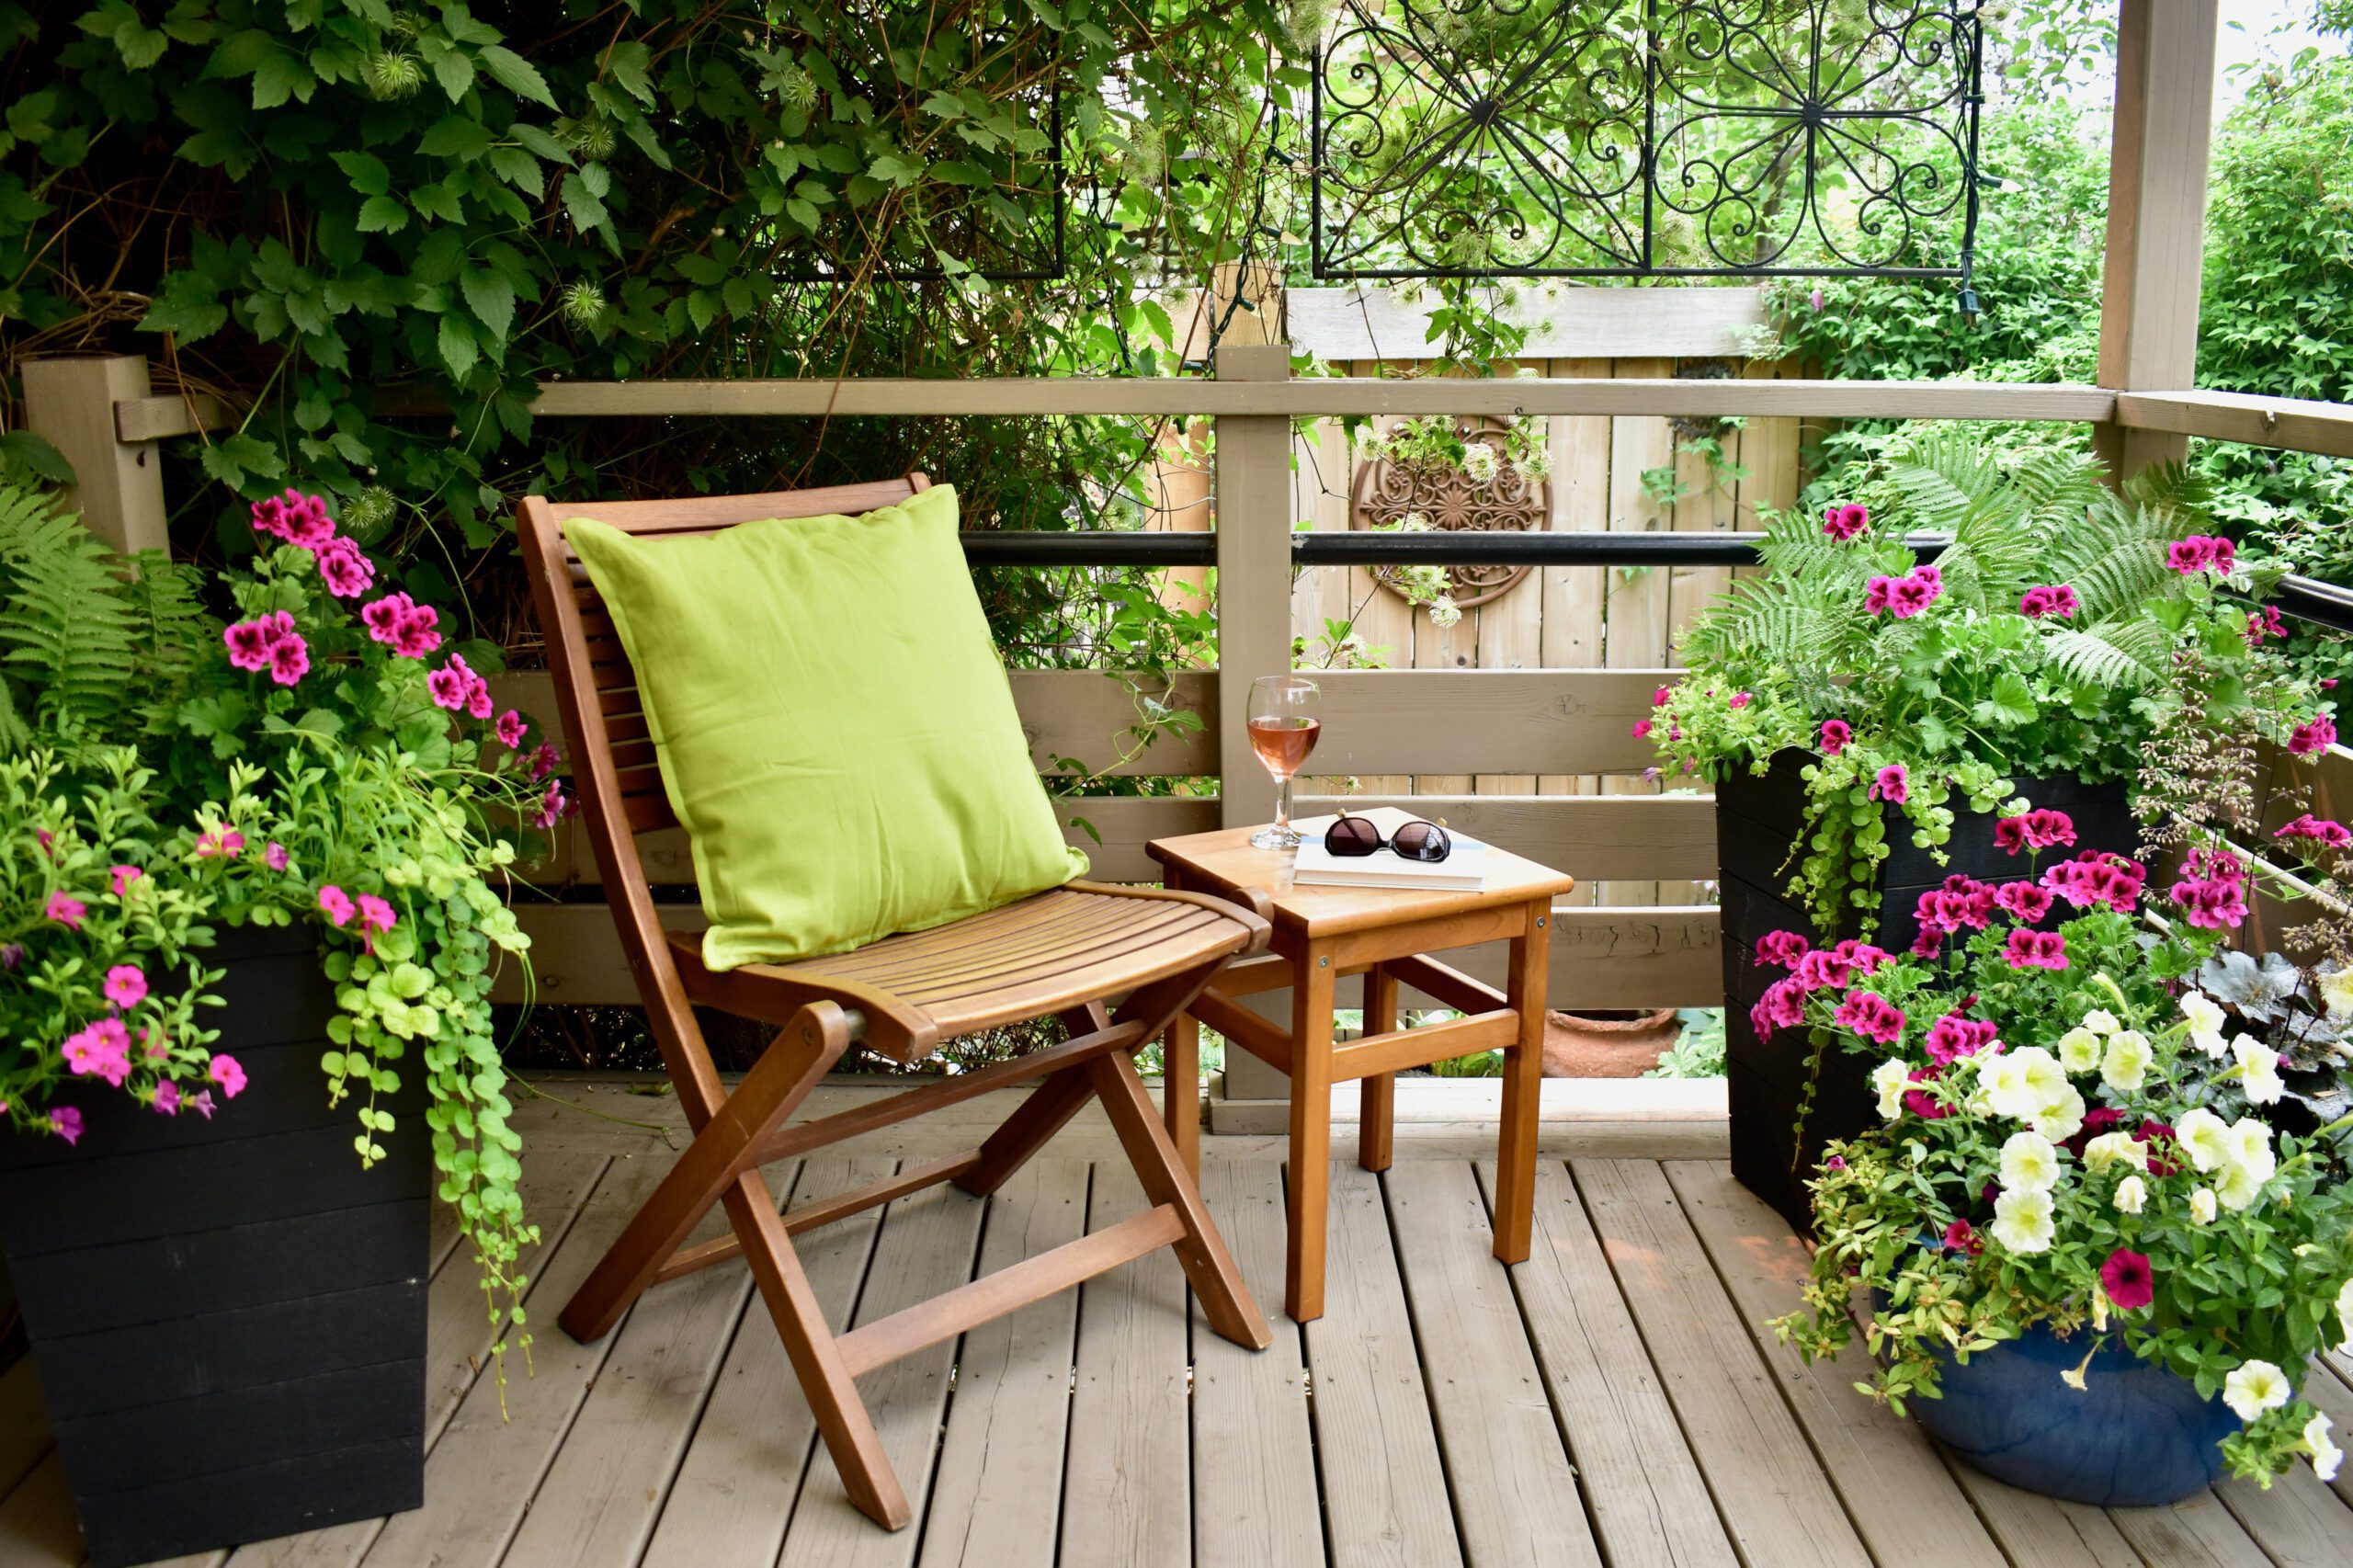 A chair with a pillow and a side table surrounded by planters on a deck.